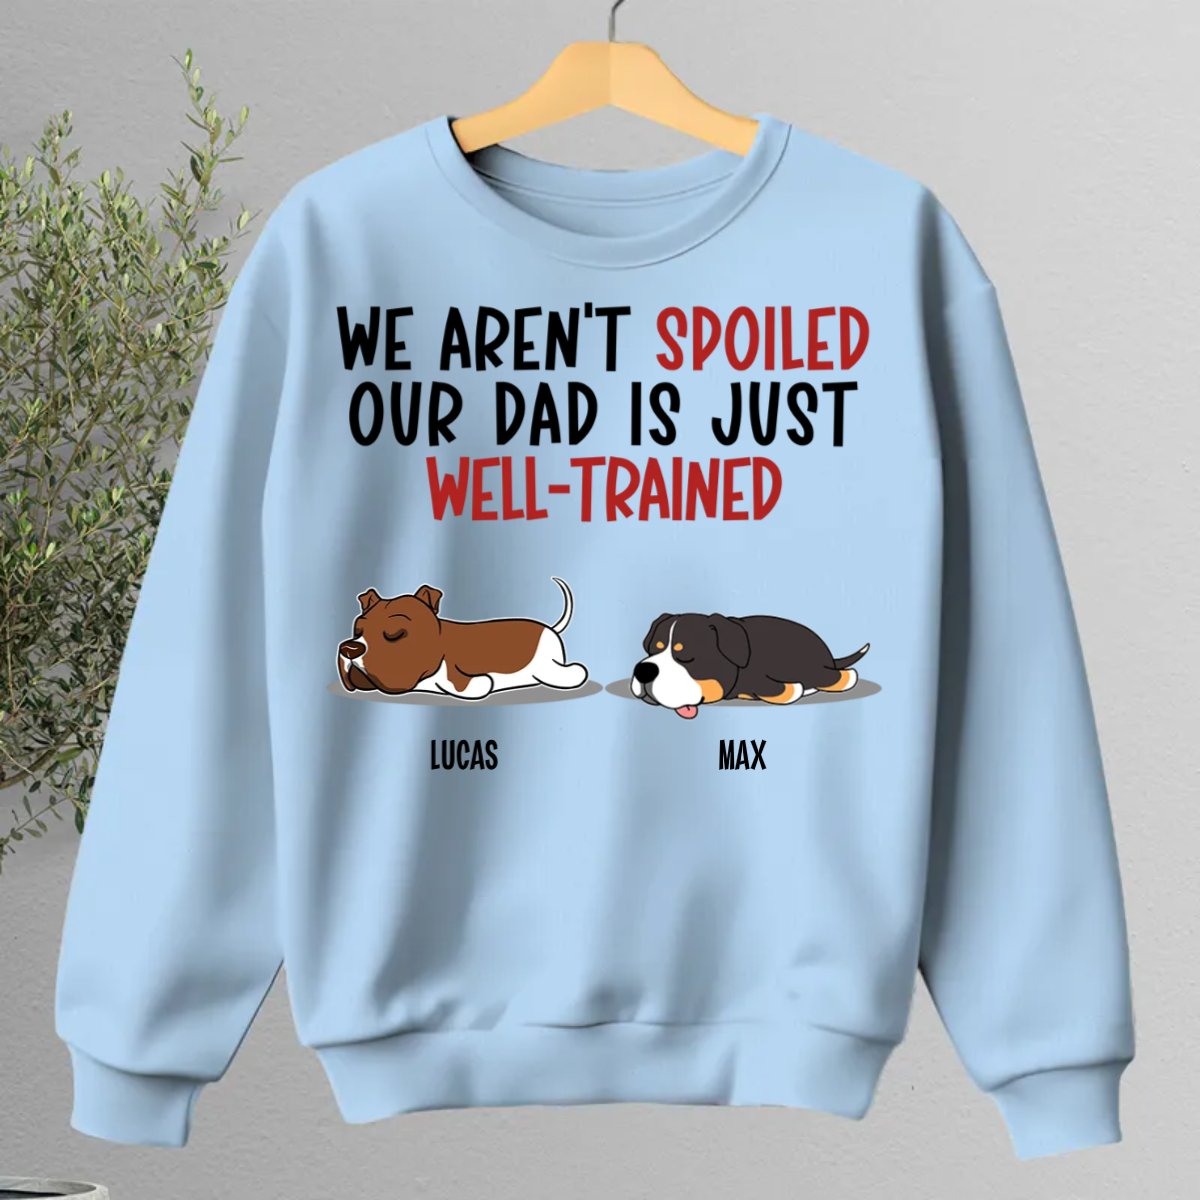 Dog Lovers - I'm Not Spoiled My Dad Is Just Well - Trained - Personalized Unisex T - shirt, Hoodie, Sweatshirt - The Next Custom Gift